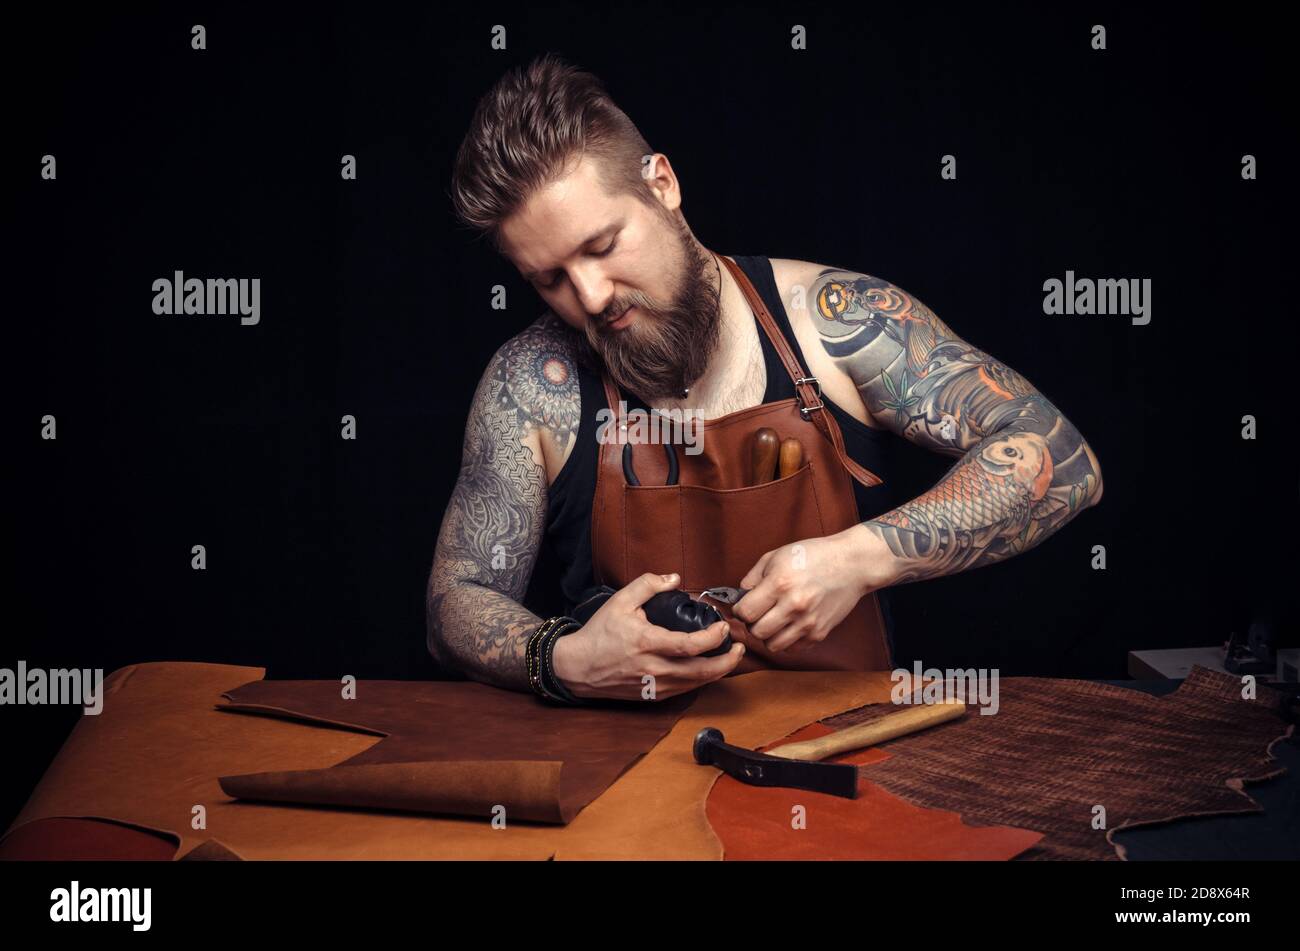 Tanner of leather produces leather goods at the studio Stock Photo